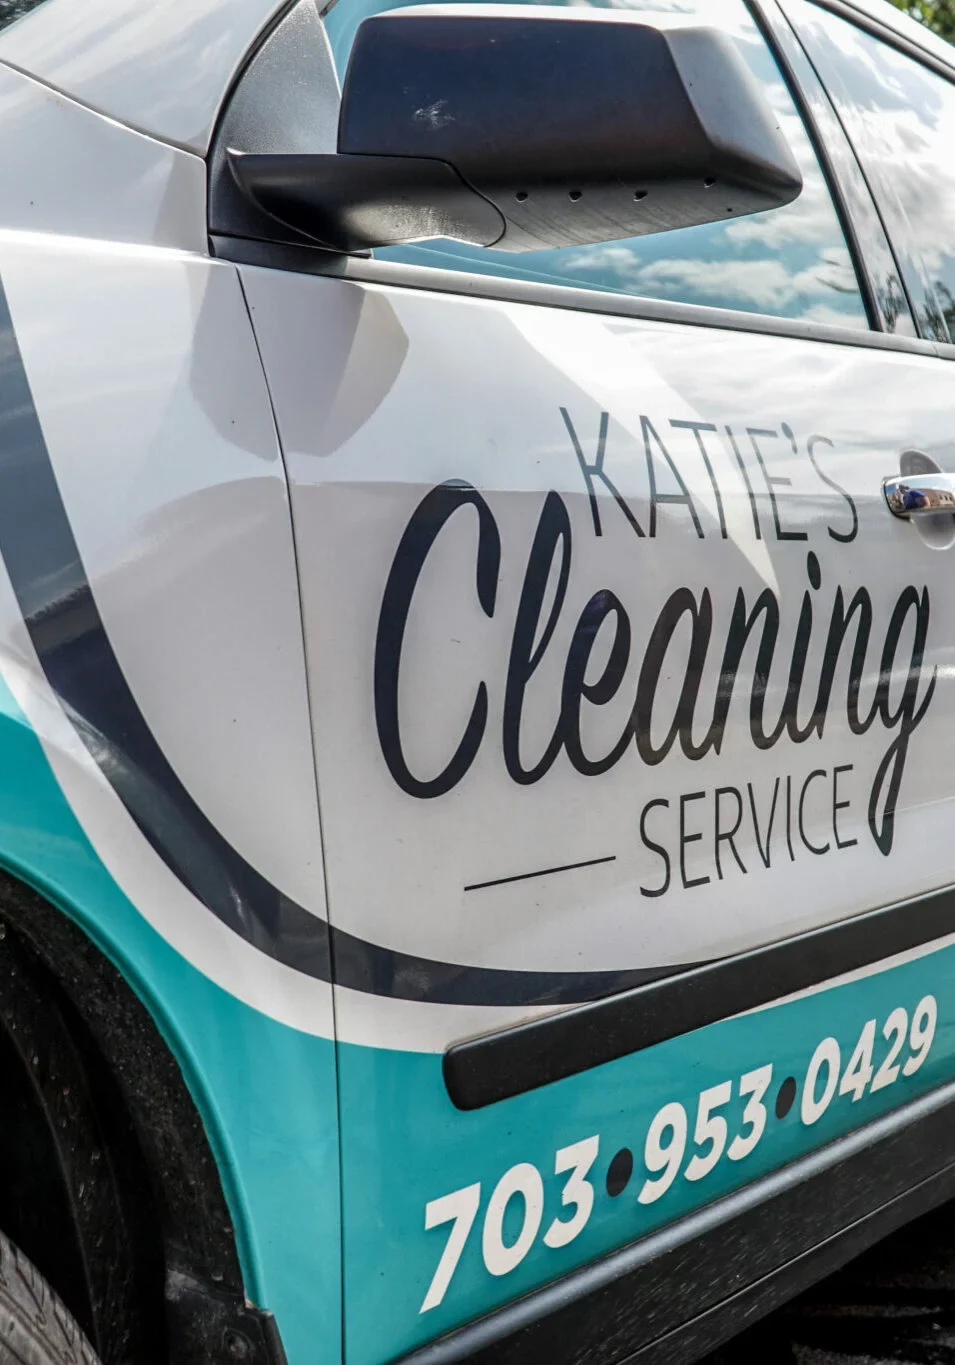 katies cleaning service vehicle